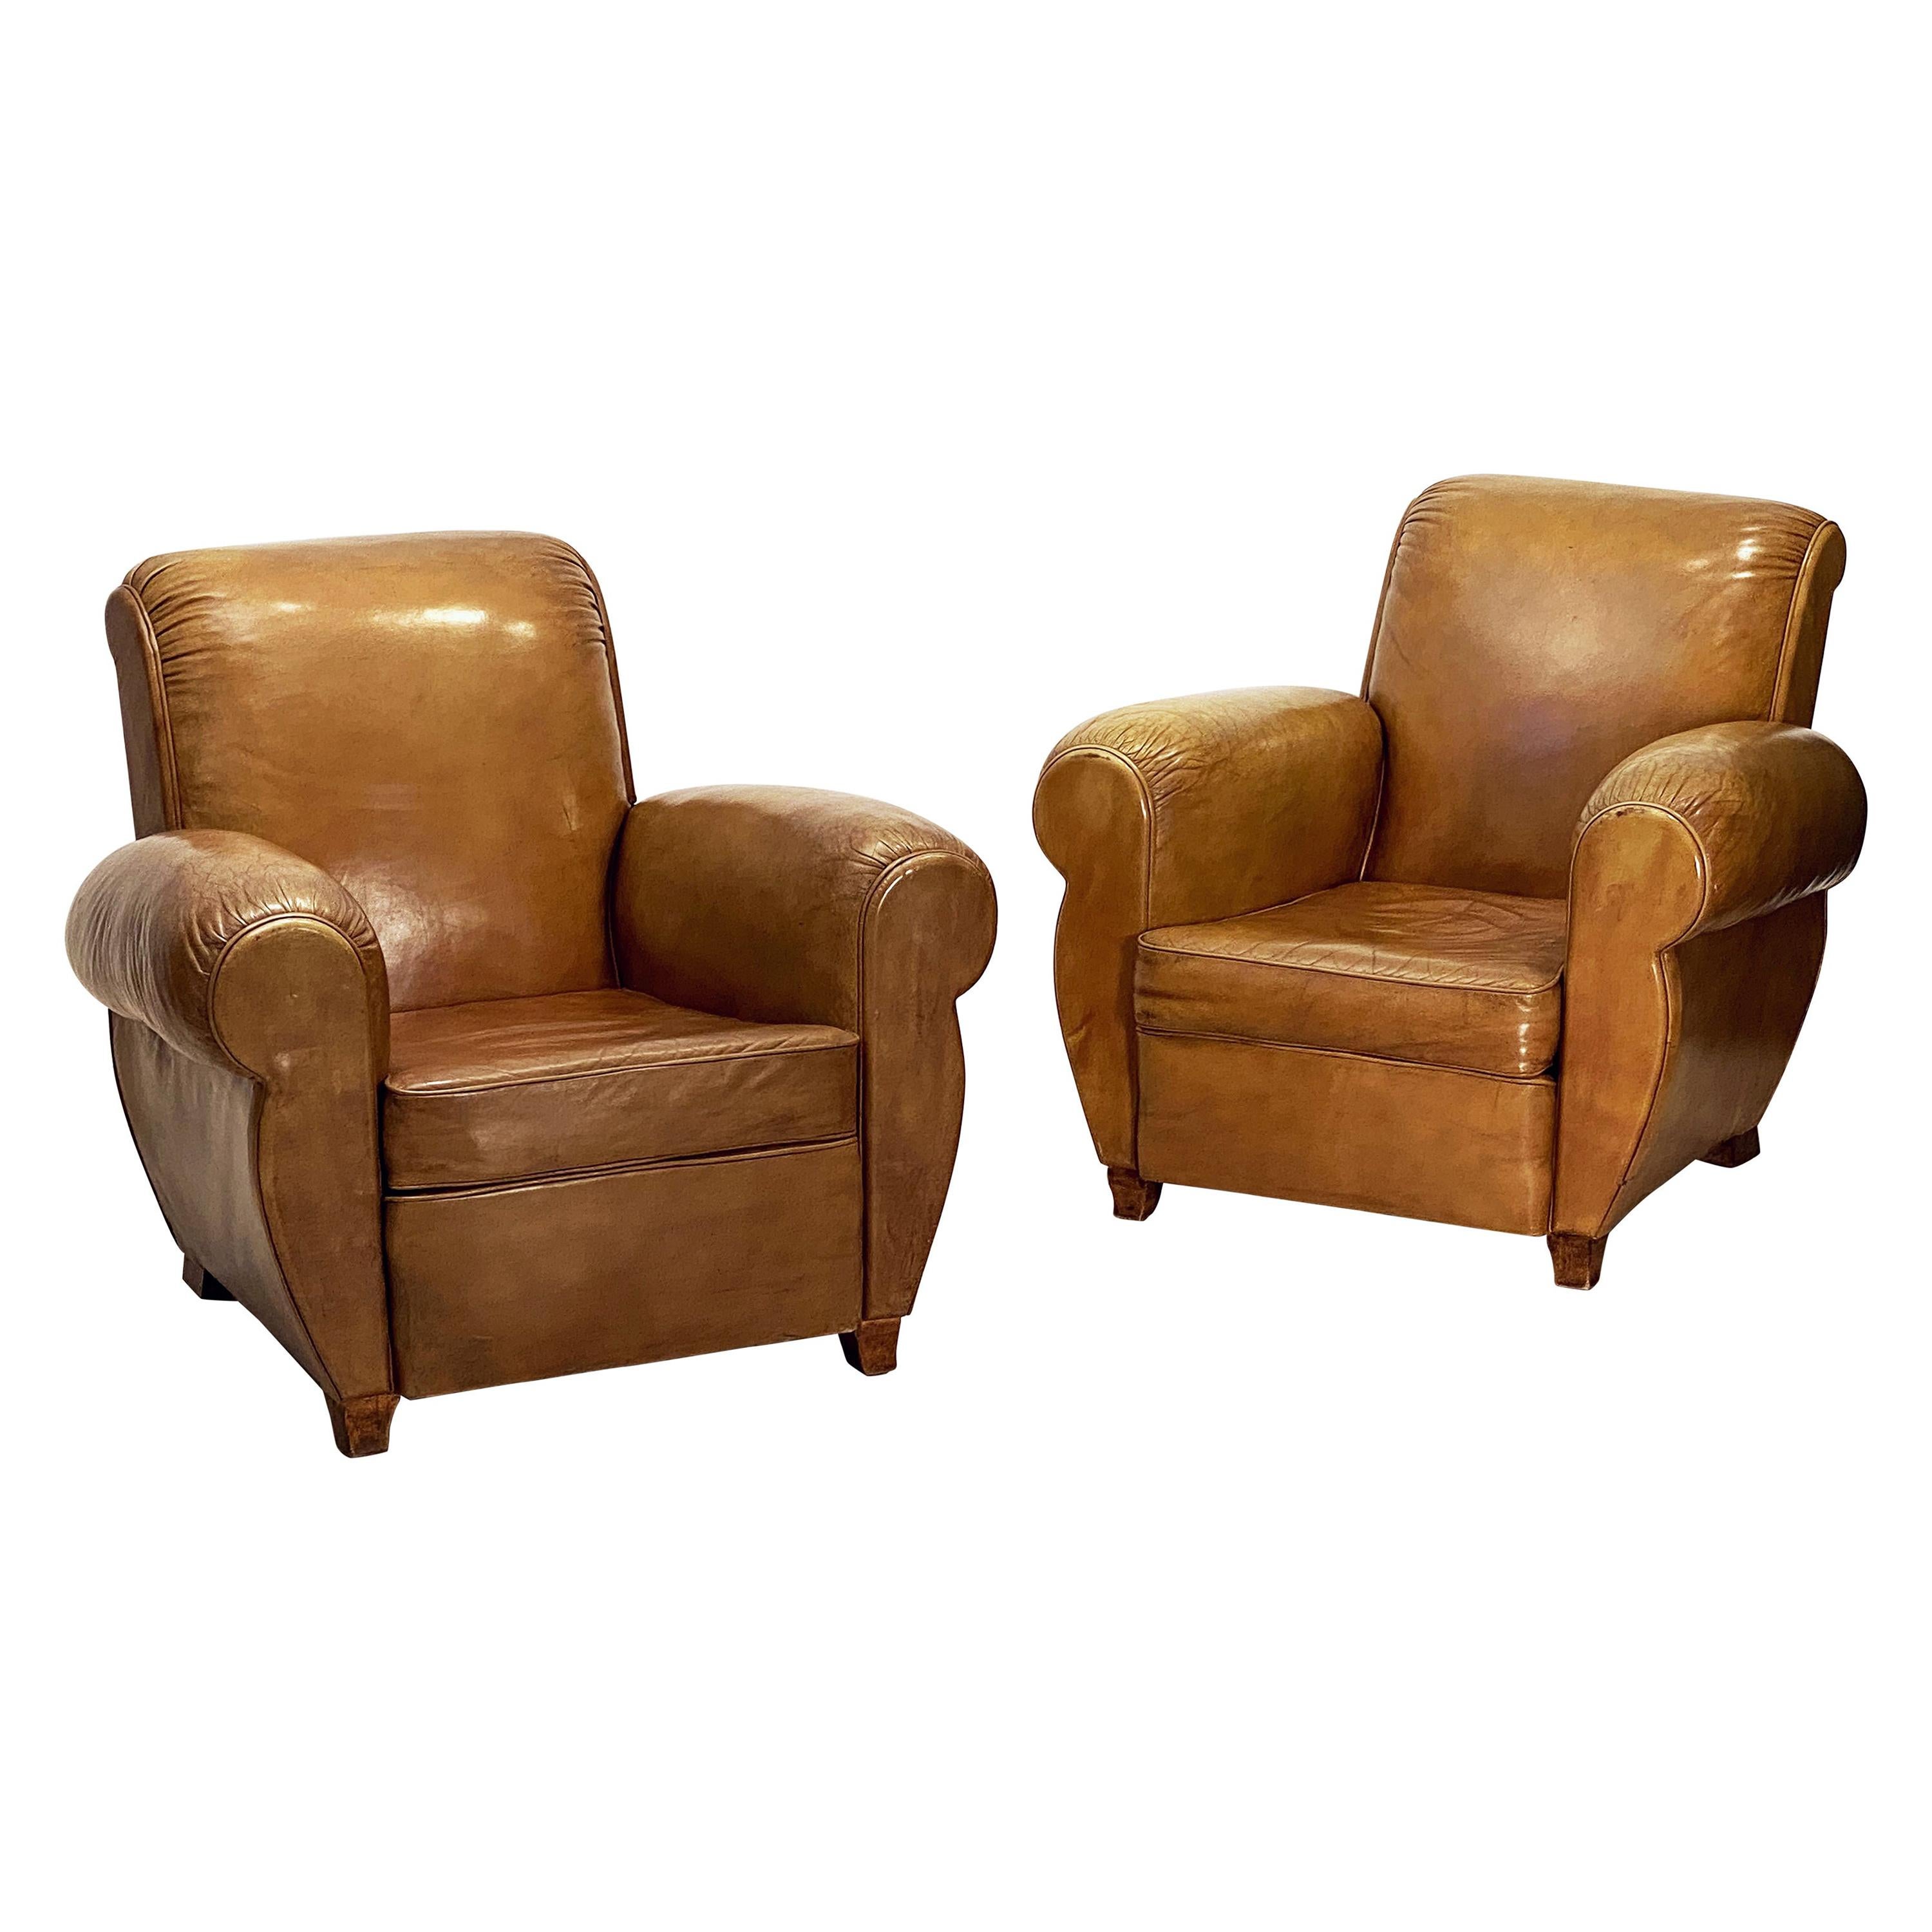 Art Deco Leather Club Chairs from France 'Priced as a Pair'